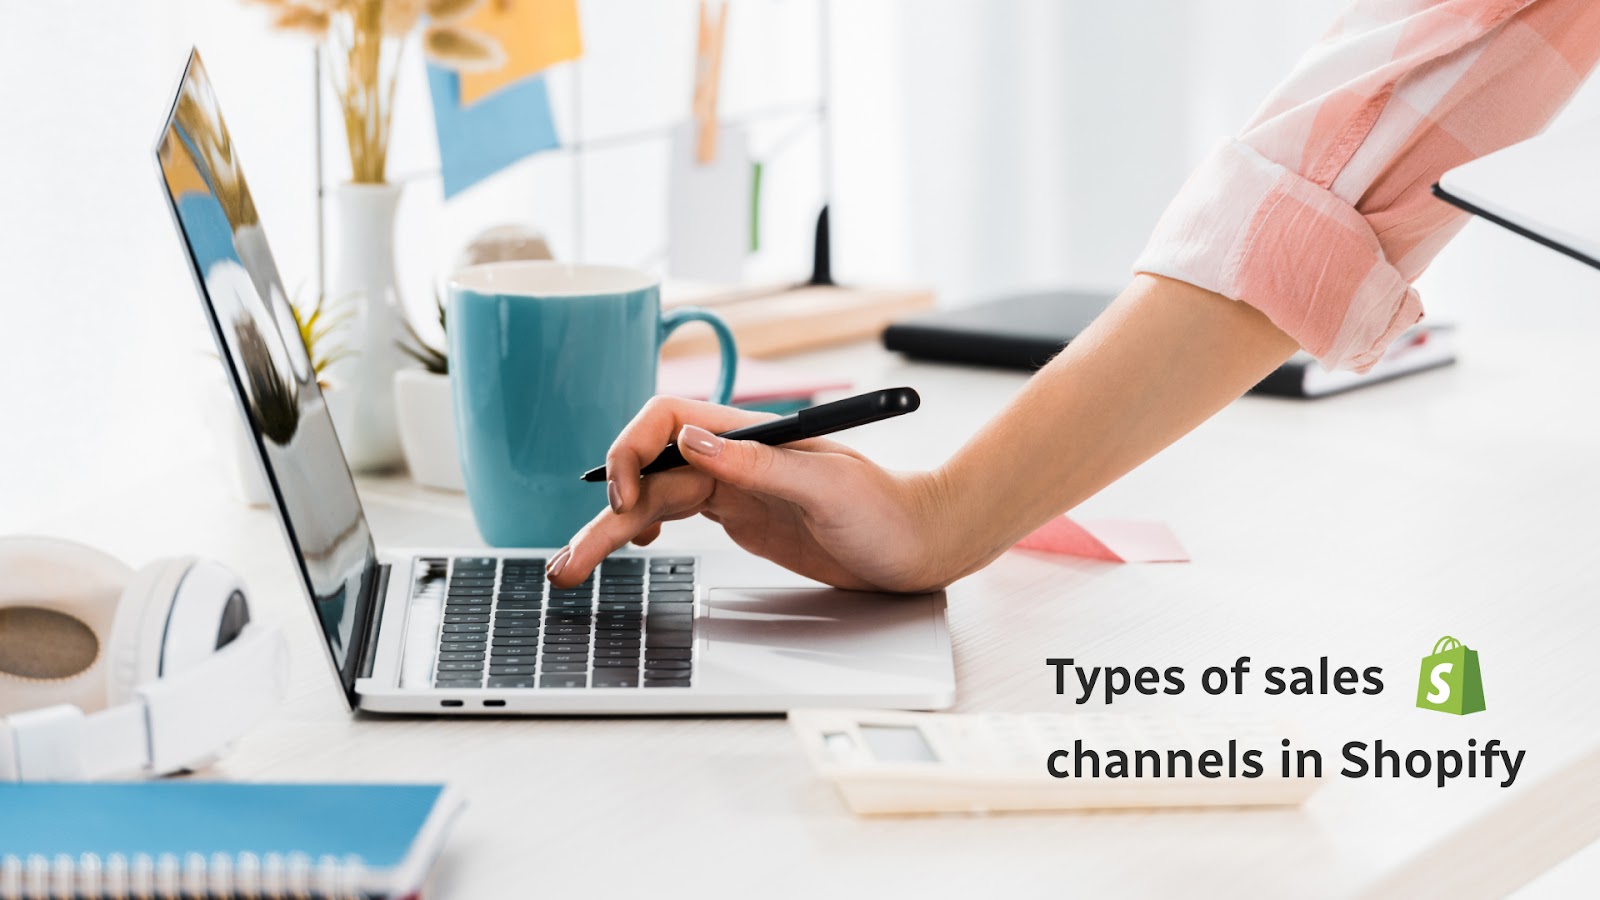 Types of sales channels in Shopify